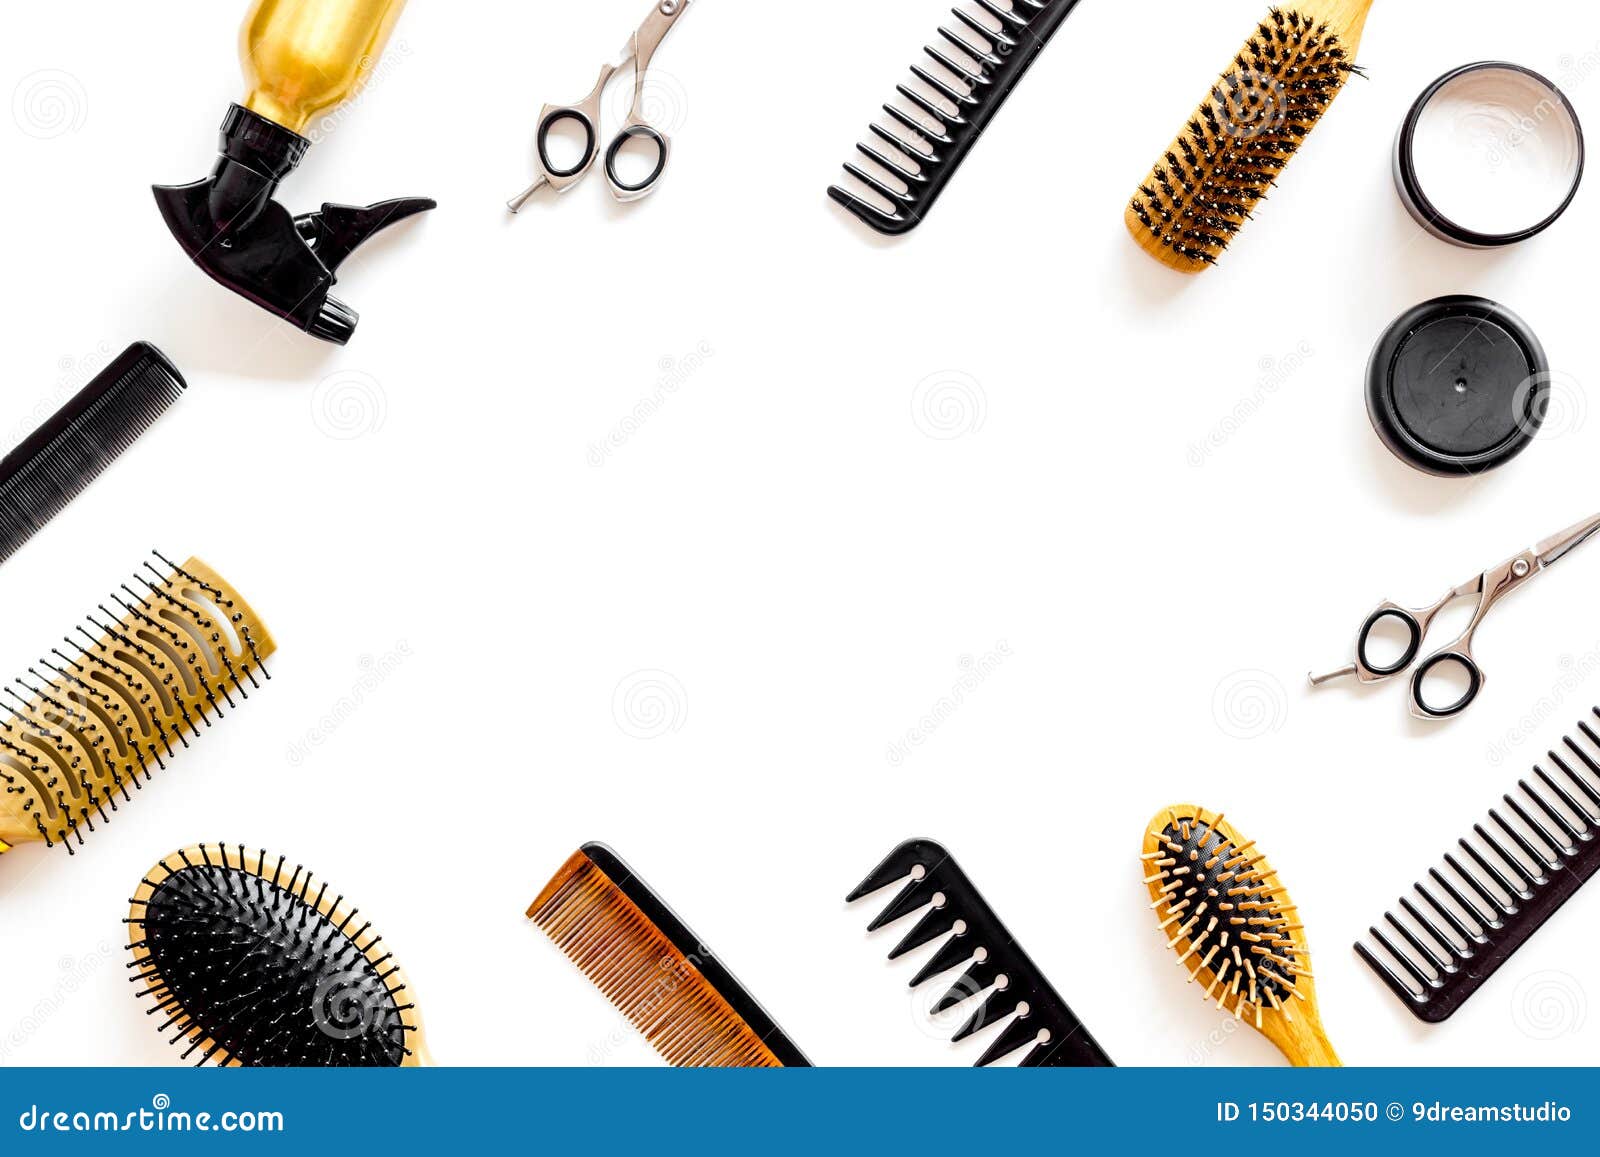 Set Of Professional Hairdresser Tools With Combs And Styling On